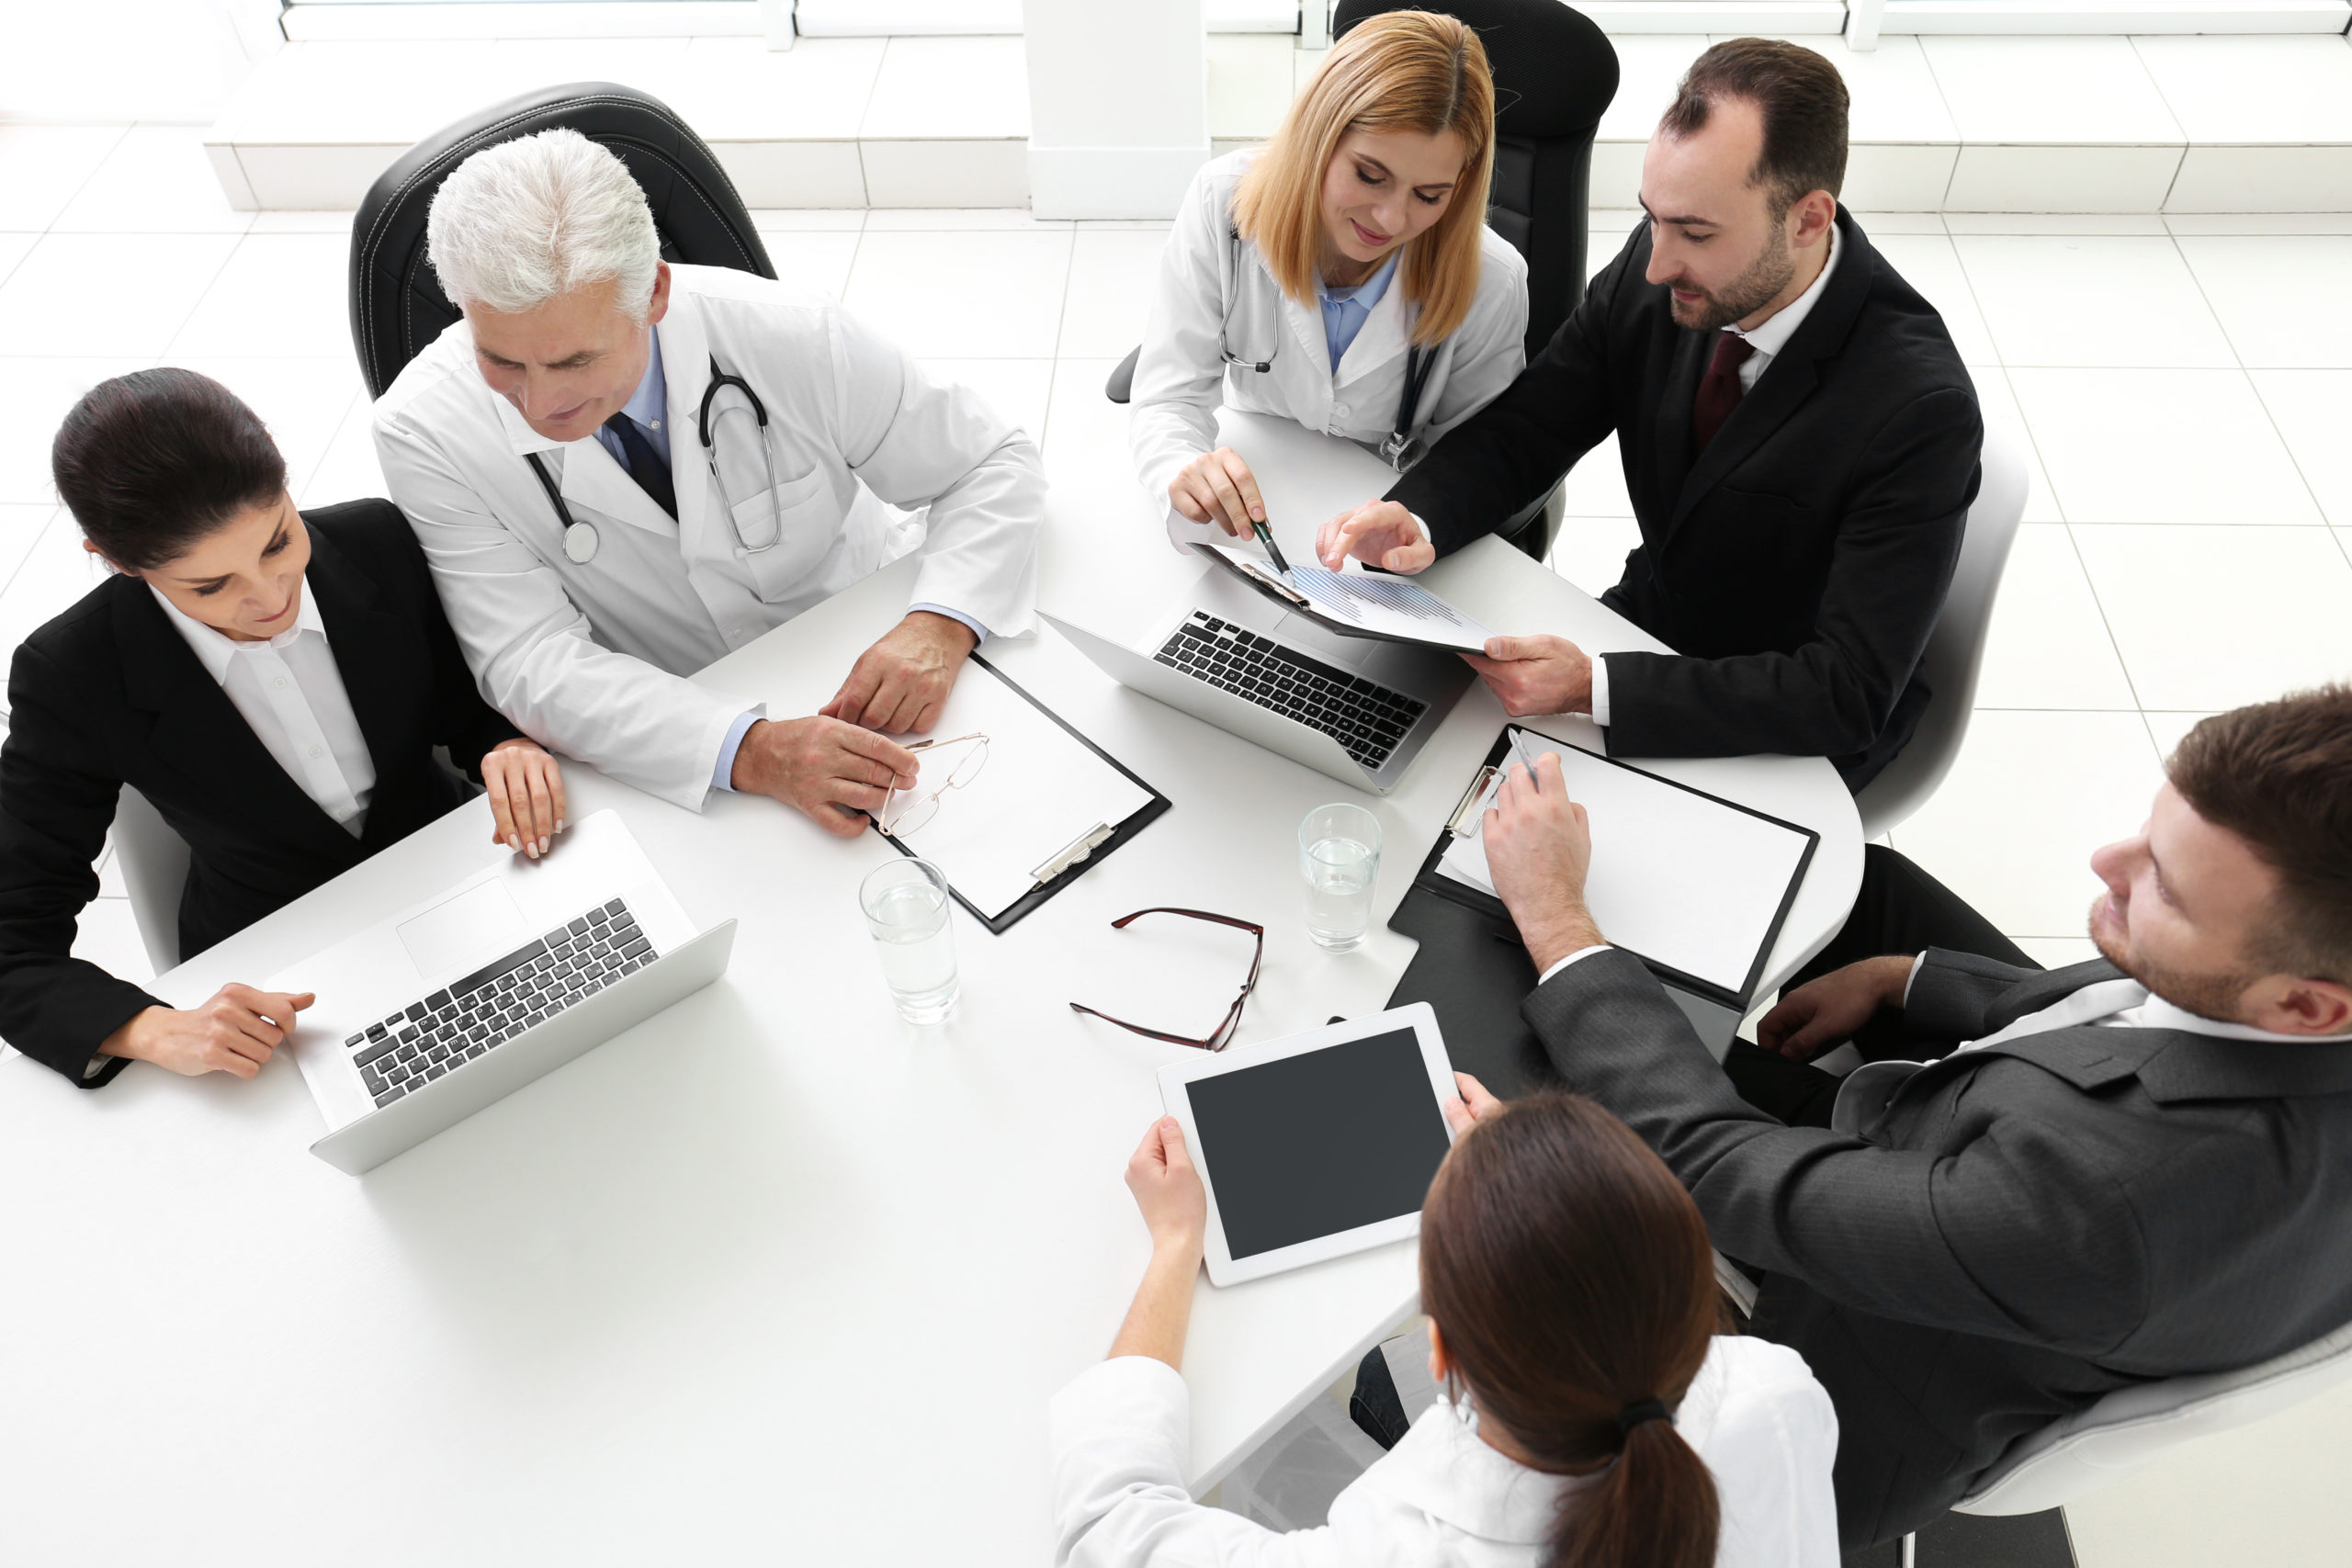 What is the healthcare industry cybersecurity task force?